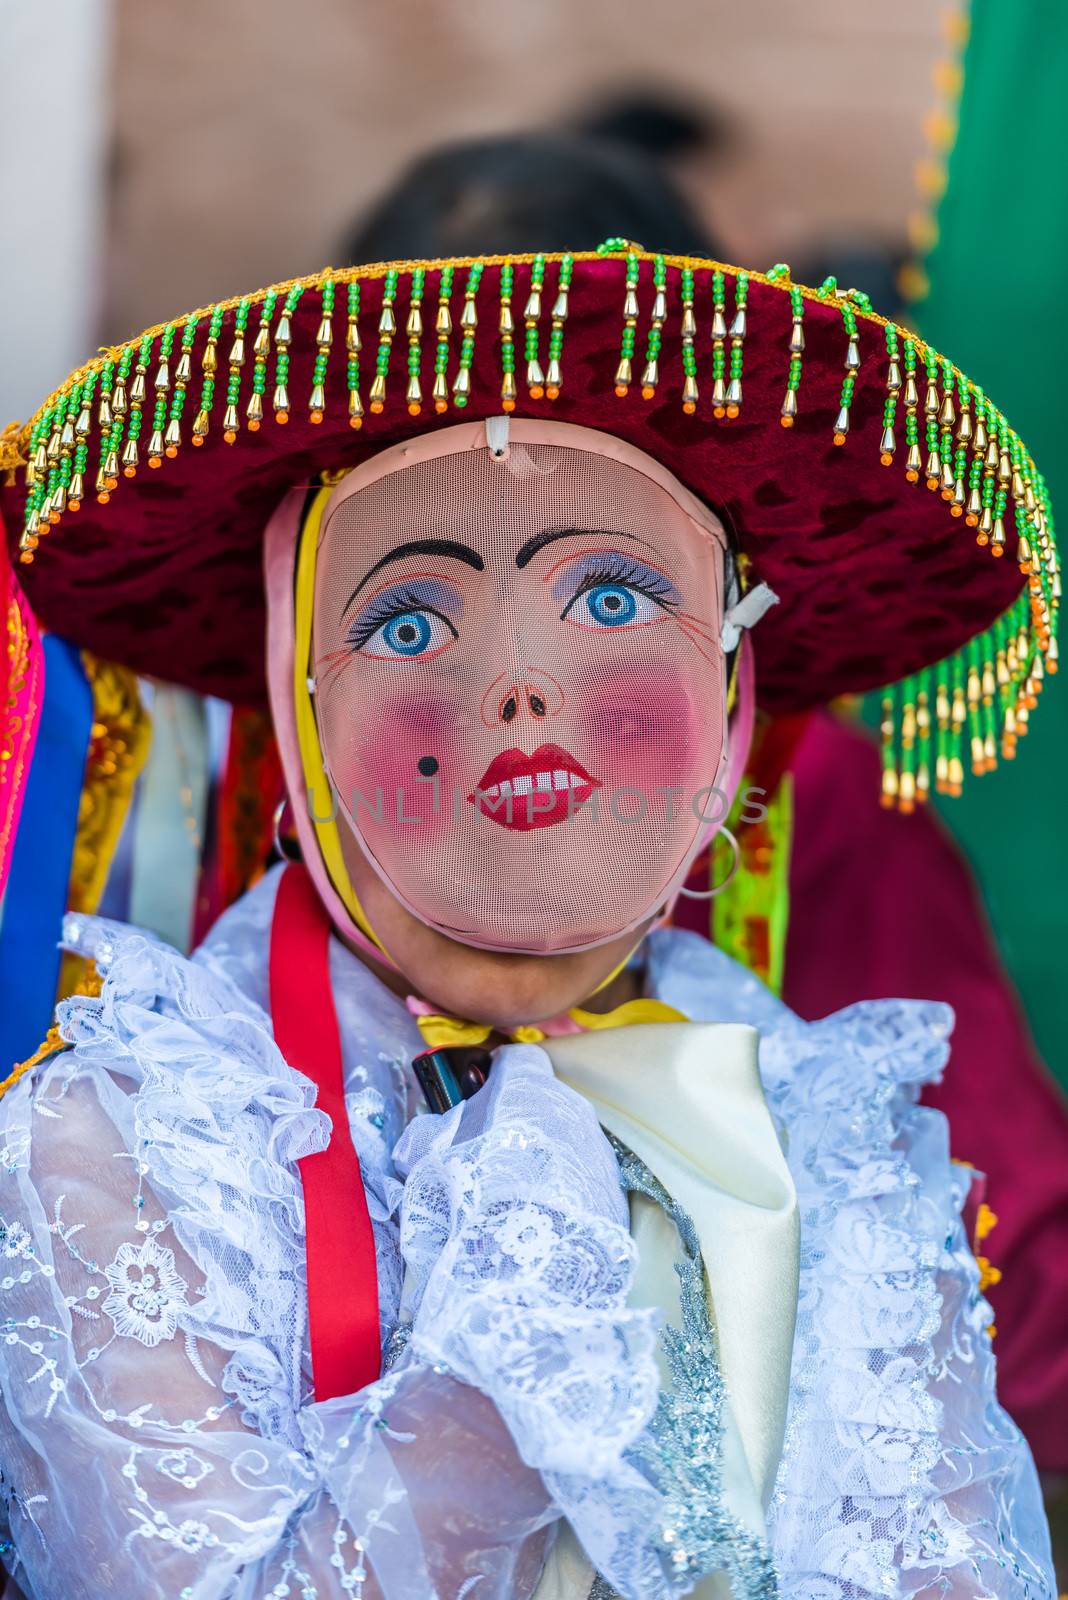 Pisac, Peru - July 16, 2013: masked woman at Virgen del Carmen parade in the peruvian Andes at Pisac Peru on july 16th, 2013